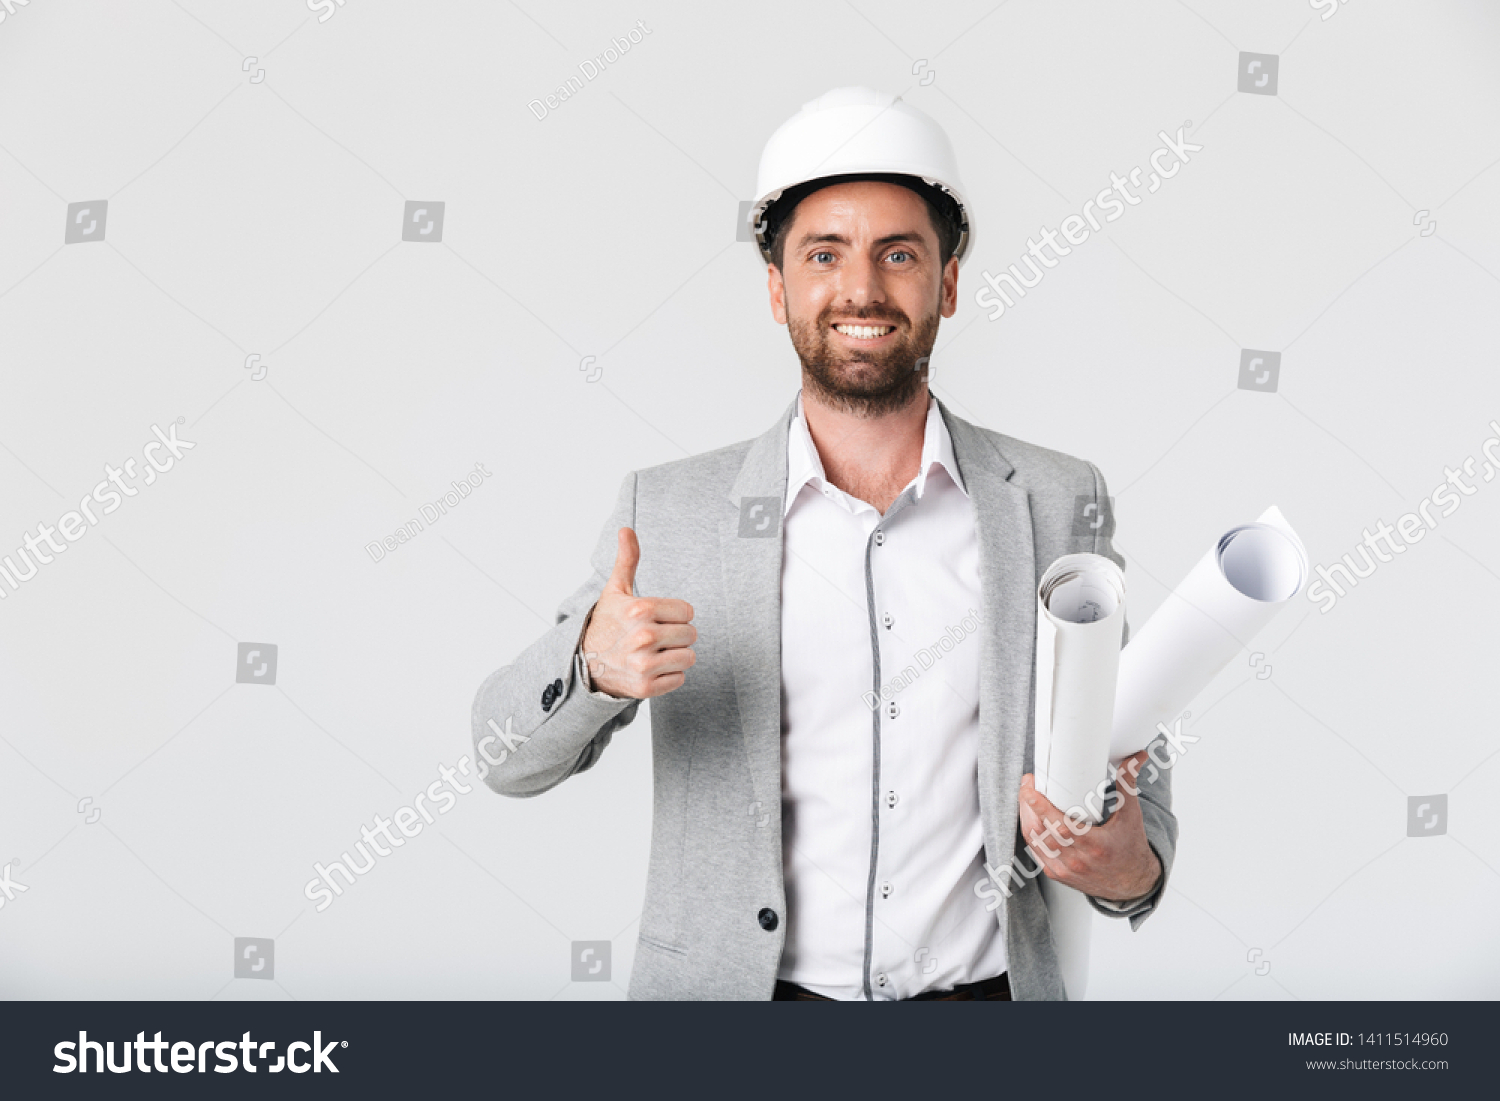 Confident bearded man builder wearing suit and hardhat standing isolated over white background, carrying blueprints, thumbs up #1411514960